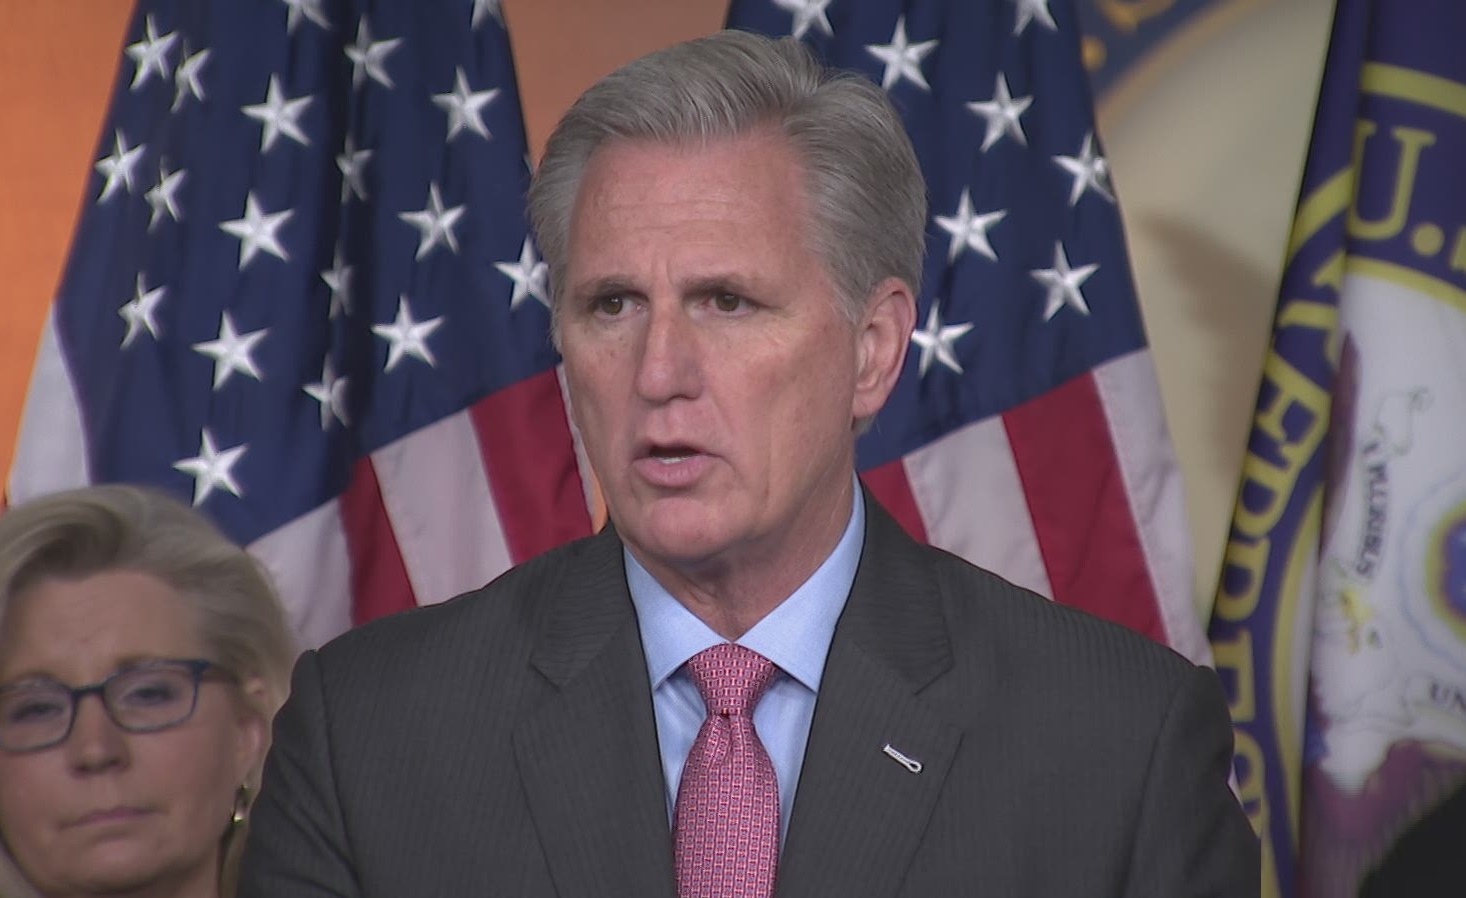 Kevin McCarthy Attacked By Dems & Media For Saying “Chinese Coronavirus”